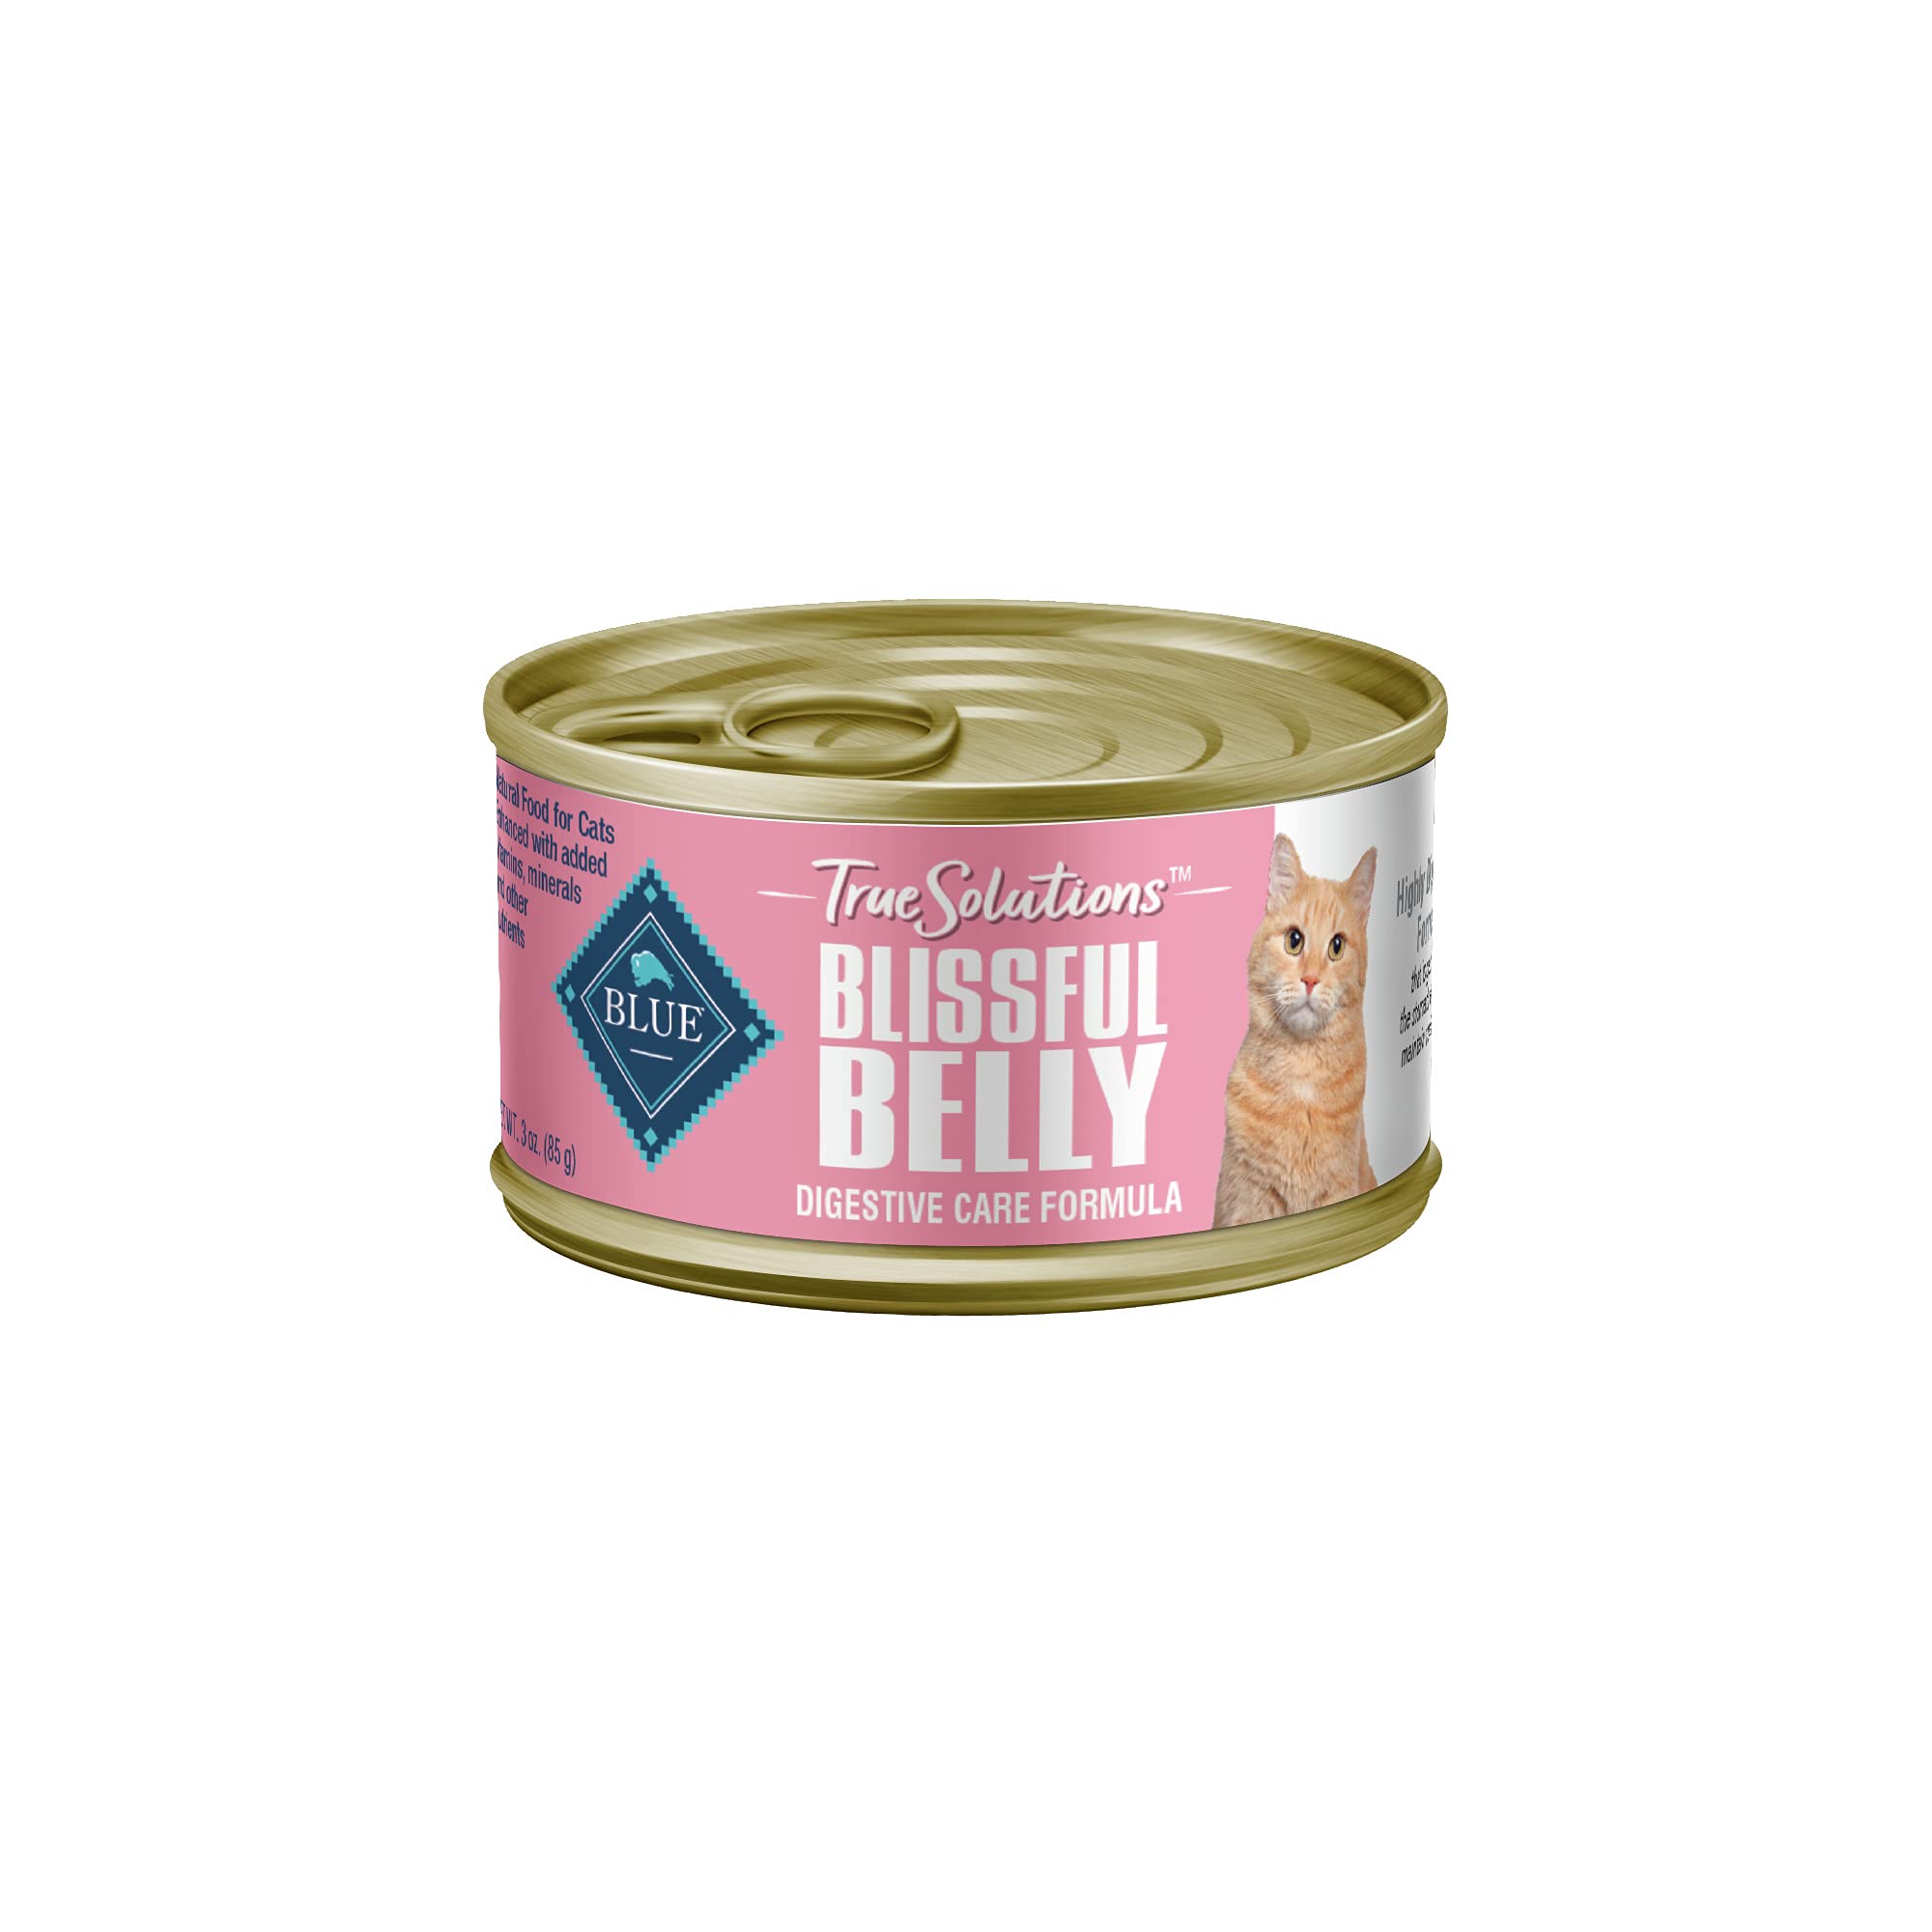 True Solutions Blissful Belly Natural Digestive Care Adult Dry Cat Food and Wet Cat Food, Chicken - $15